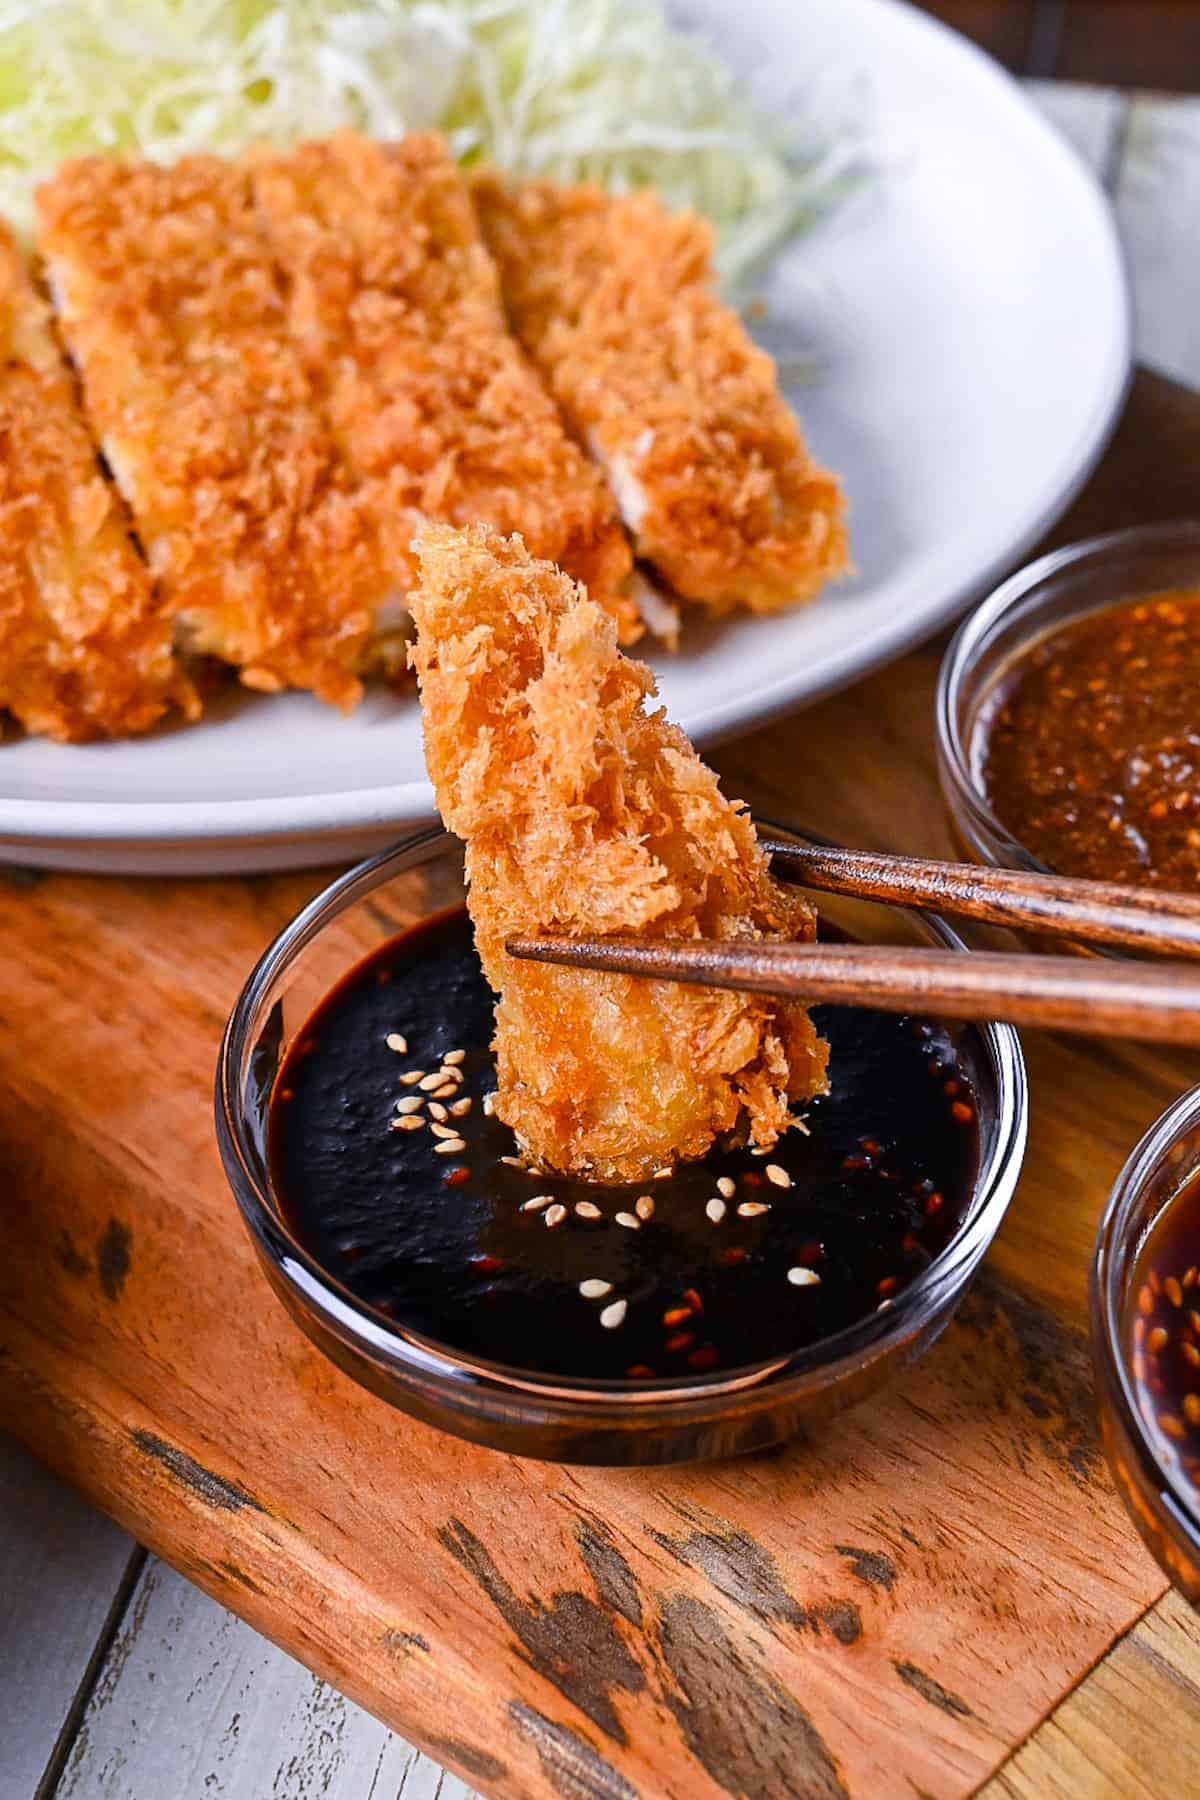 A piece of tonkatsu dipped in Nagoya style red miso sauce